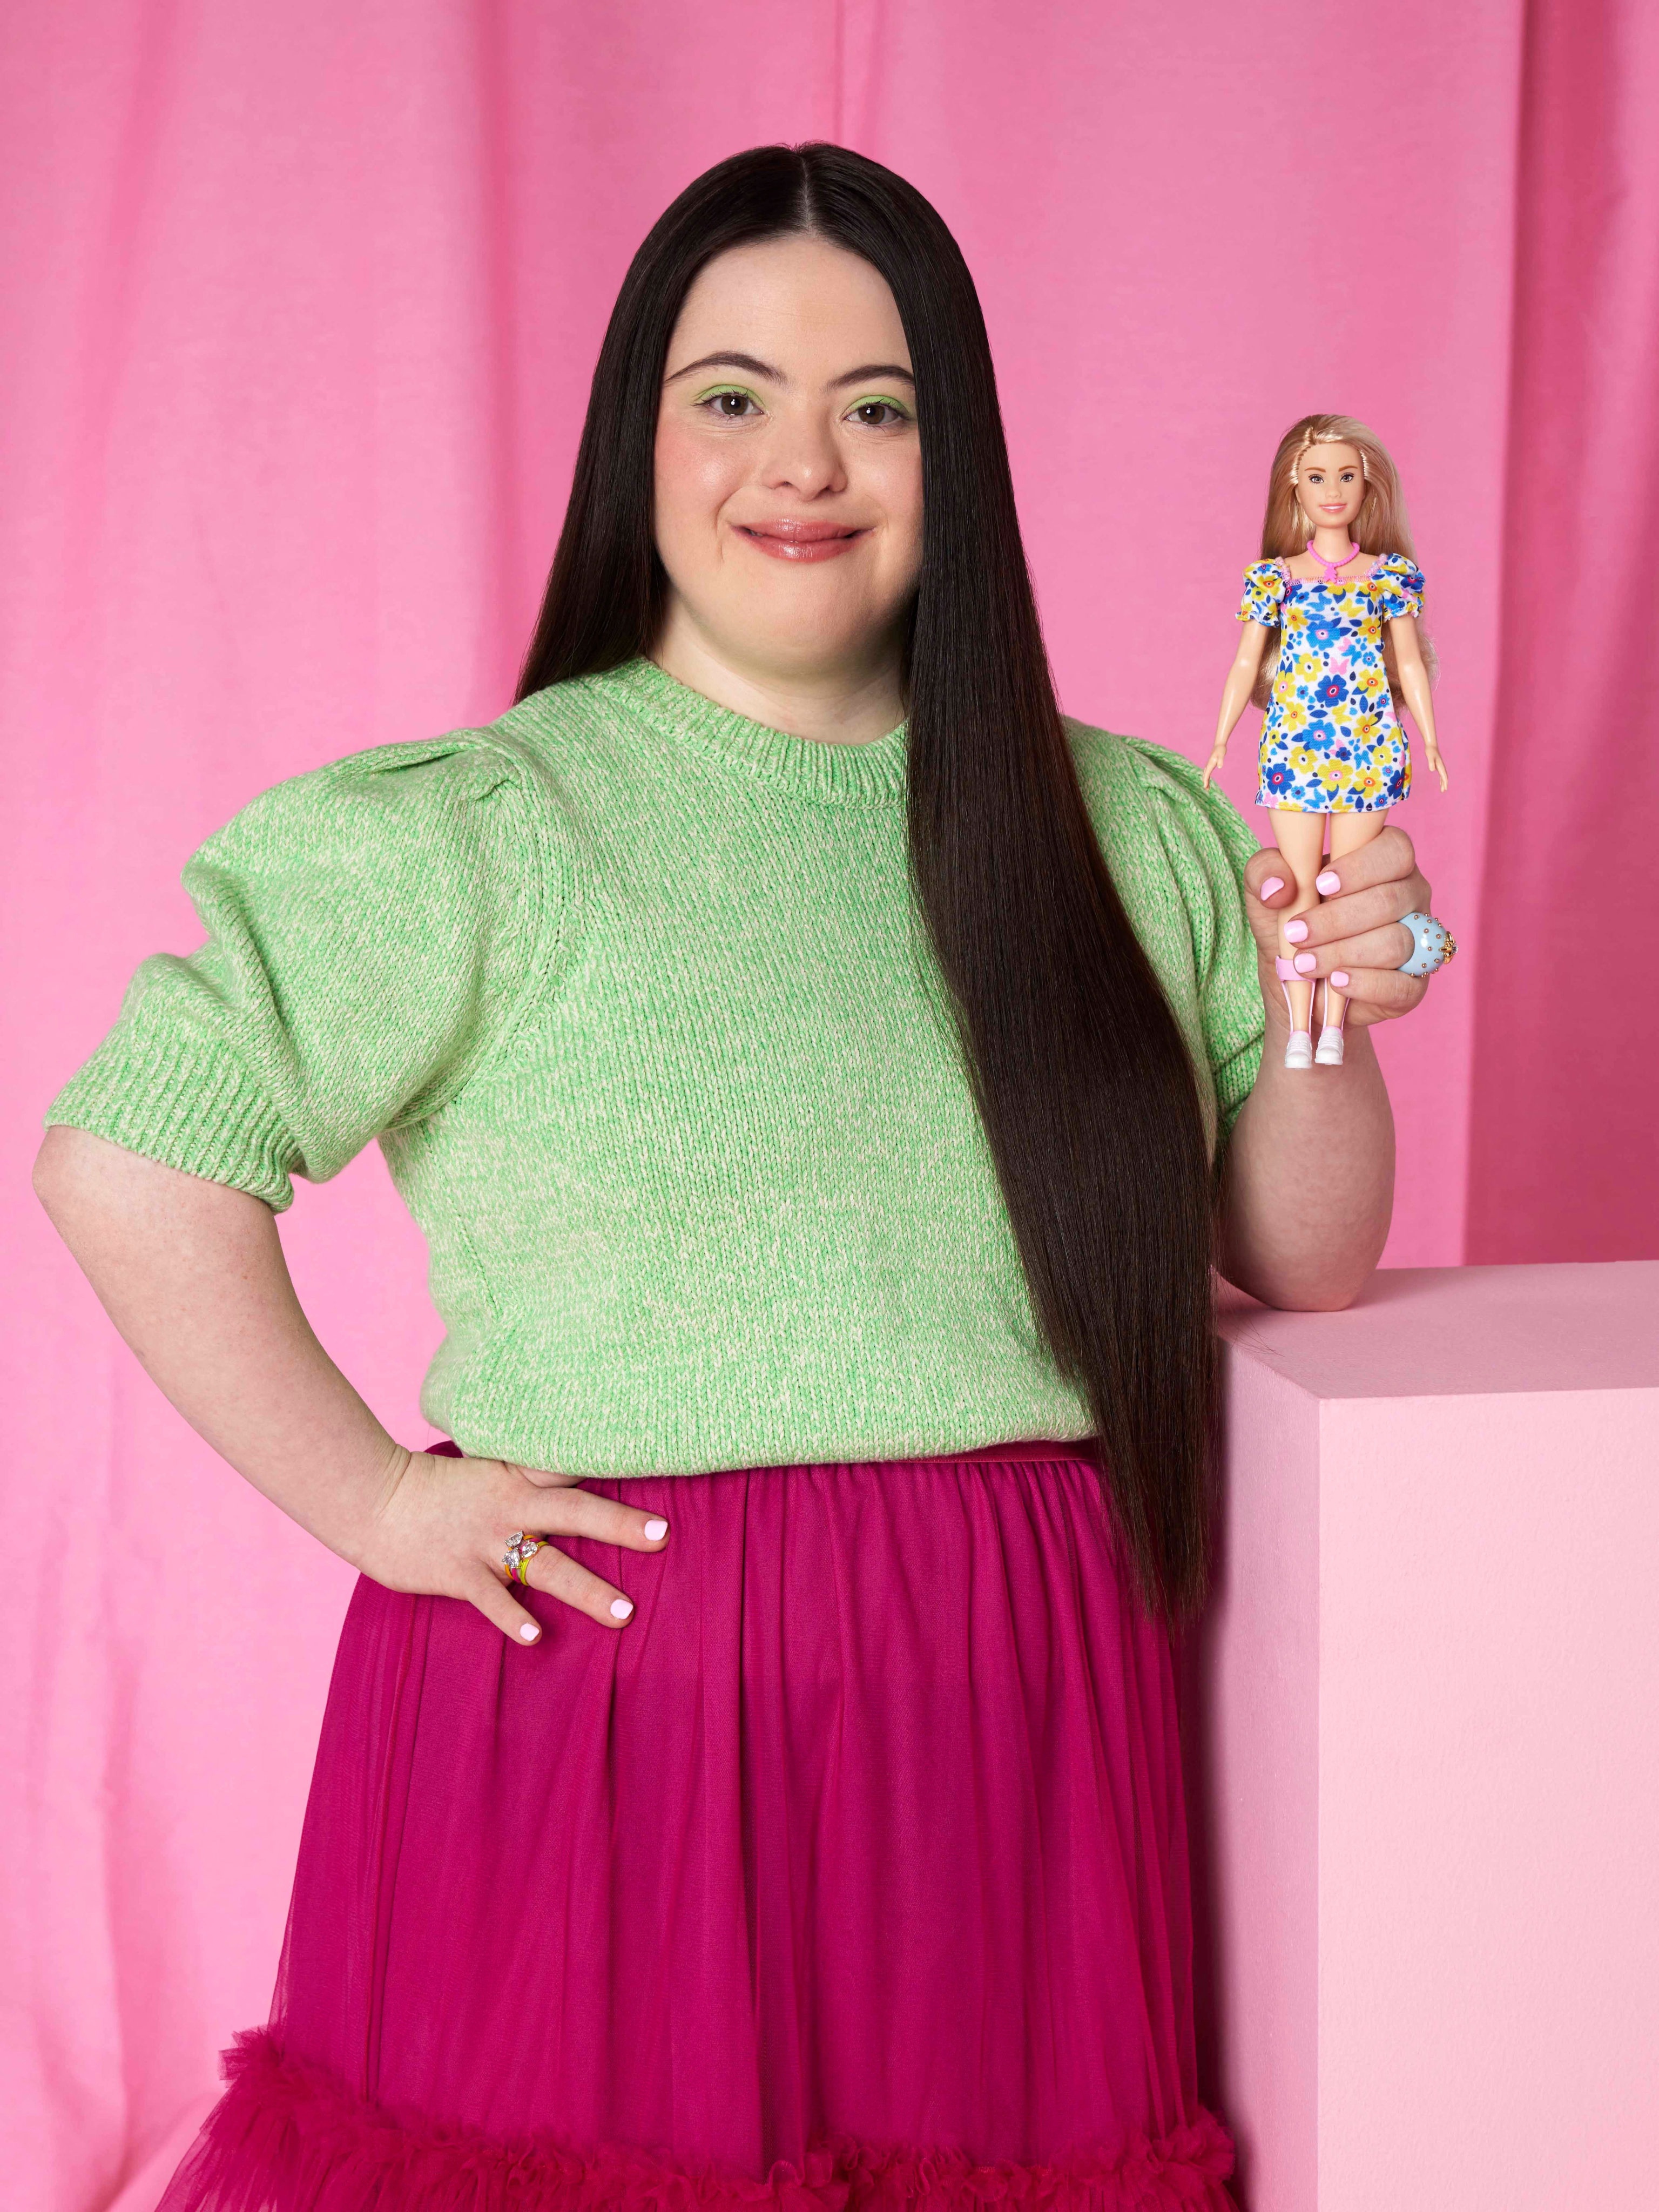 Mattel introduces first Barbie doll with Down's syndrome as part of 2023  Fashionistas line - YP